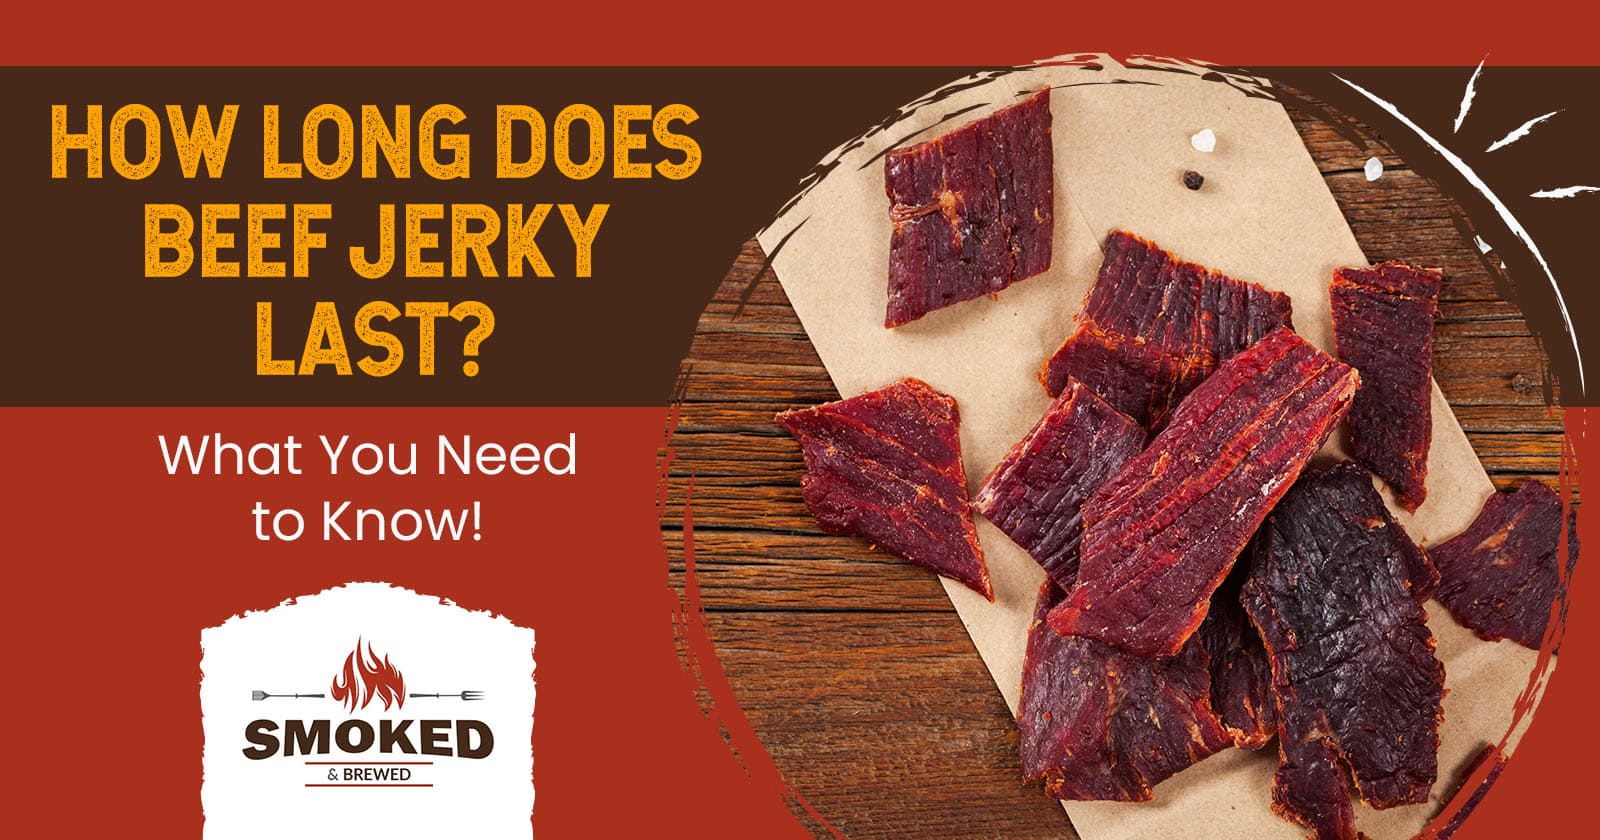 How Long Does Beef Jerky Last? What You Need to Know!